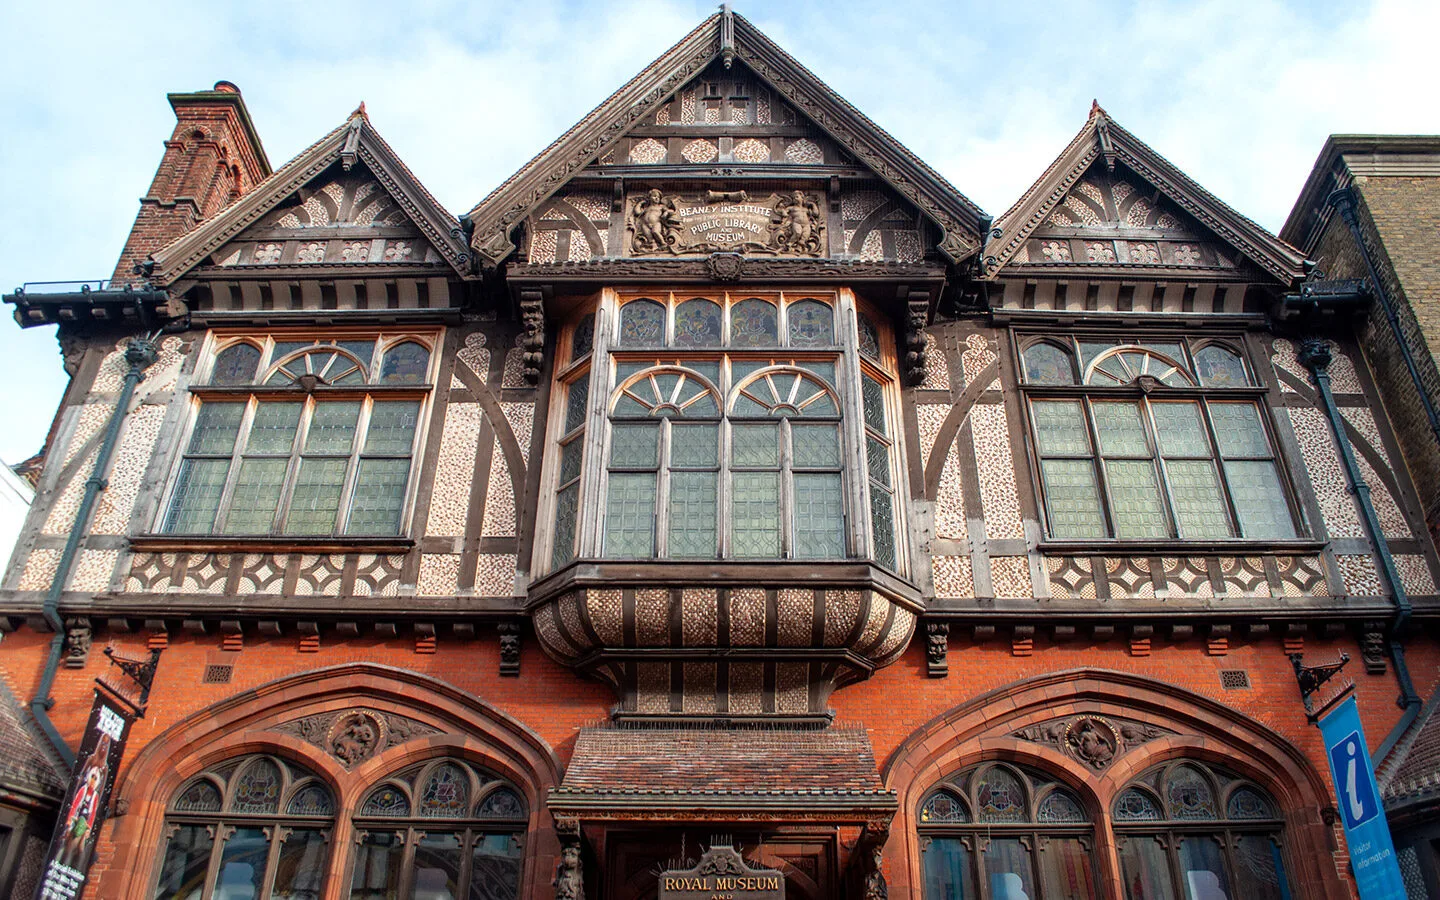 The Beaney House of Art & Knowledge in Canterbury